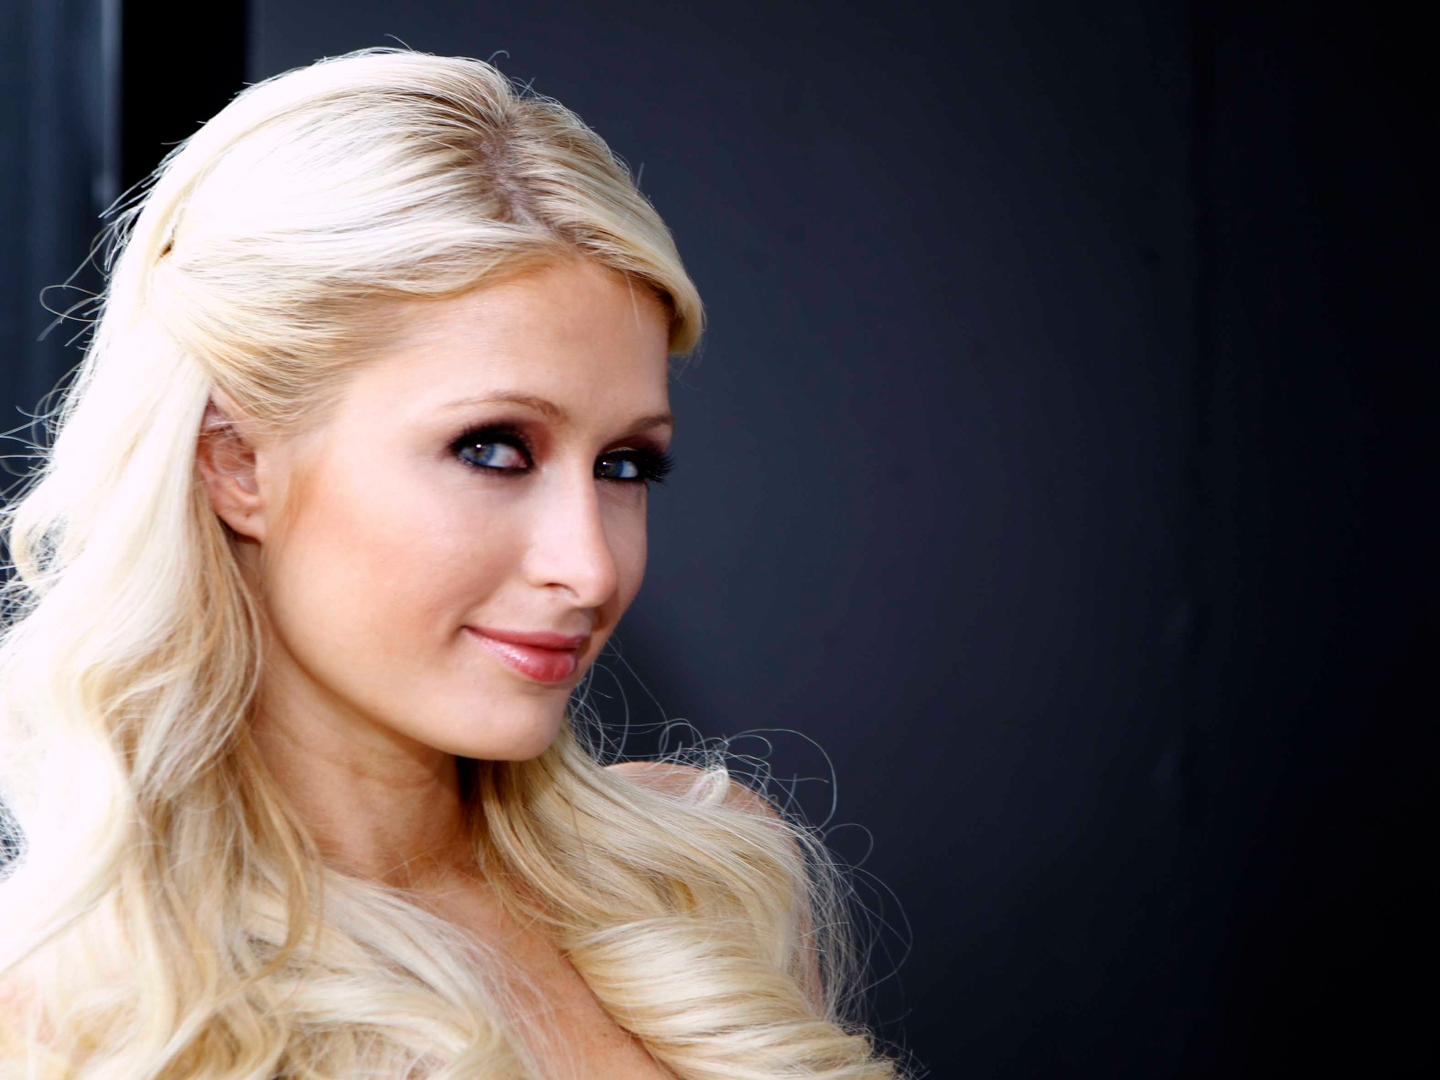 Paris Hilton & More Celebrities Who Got Engaged in 2021